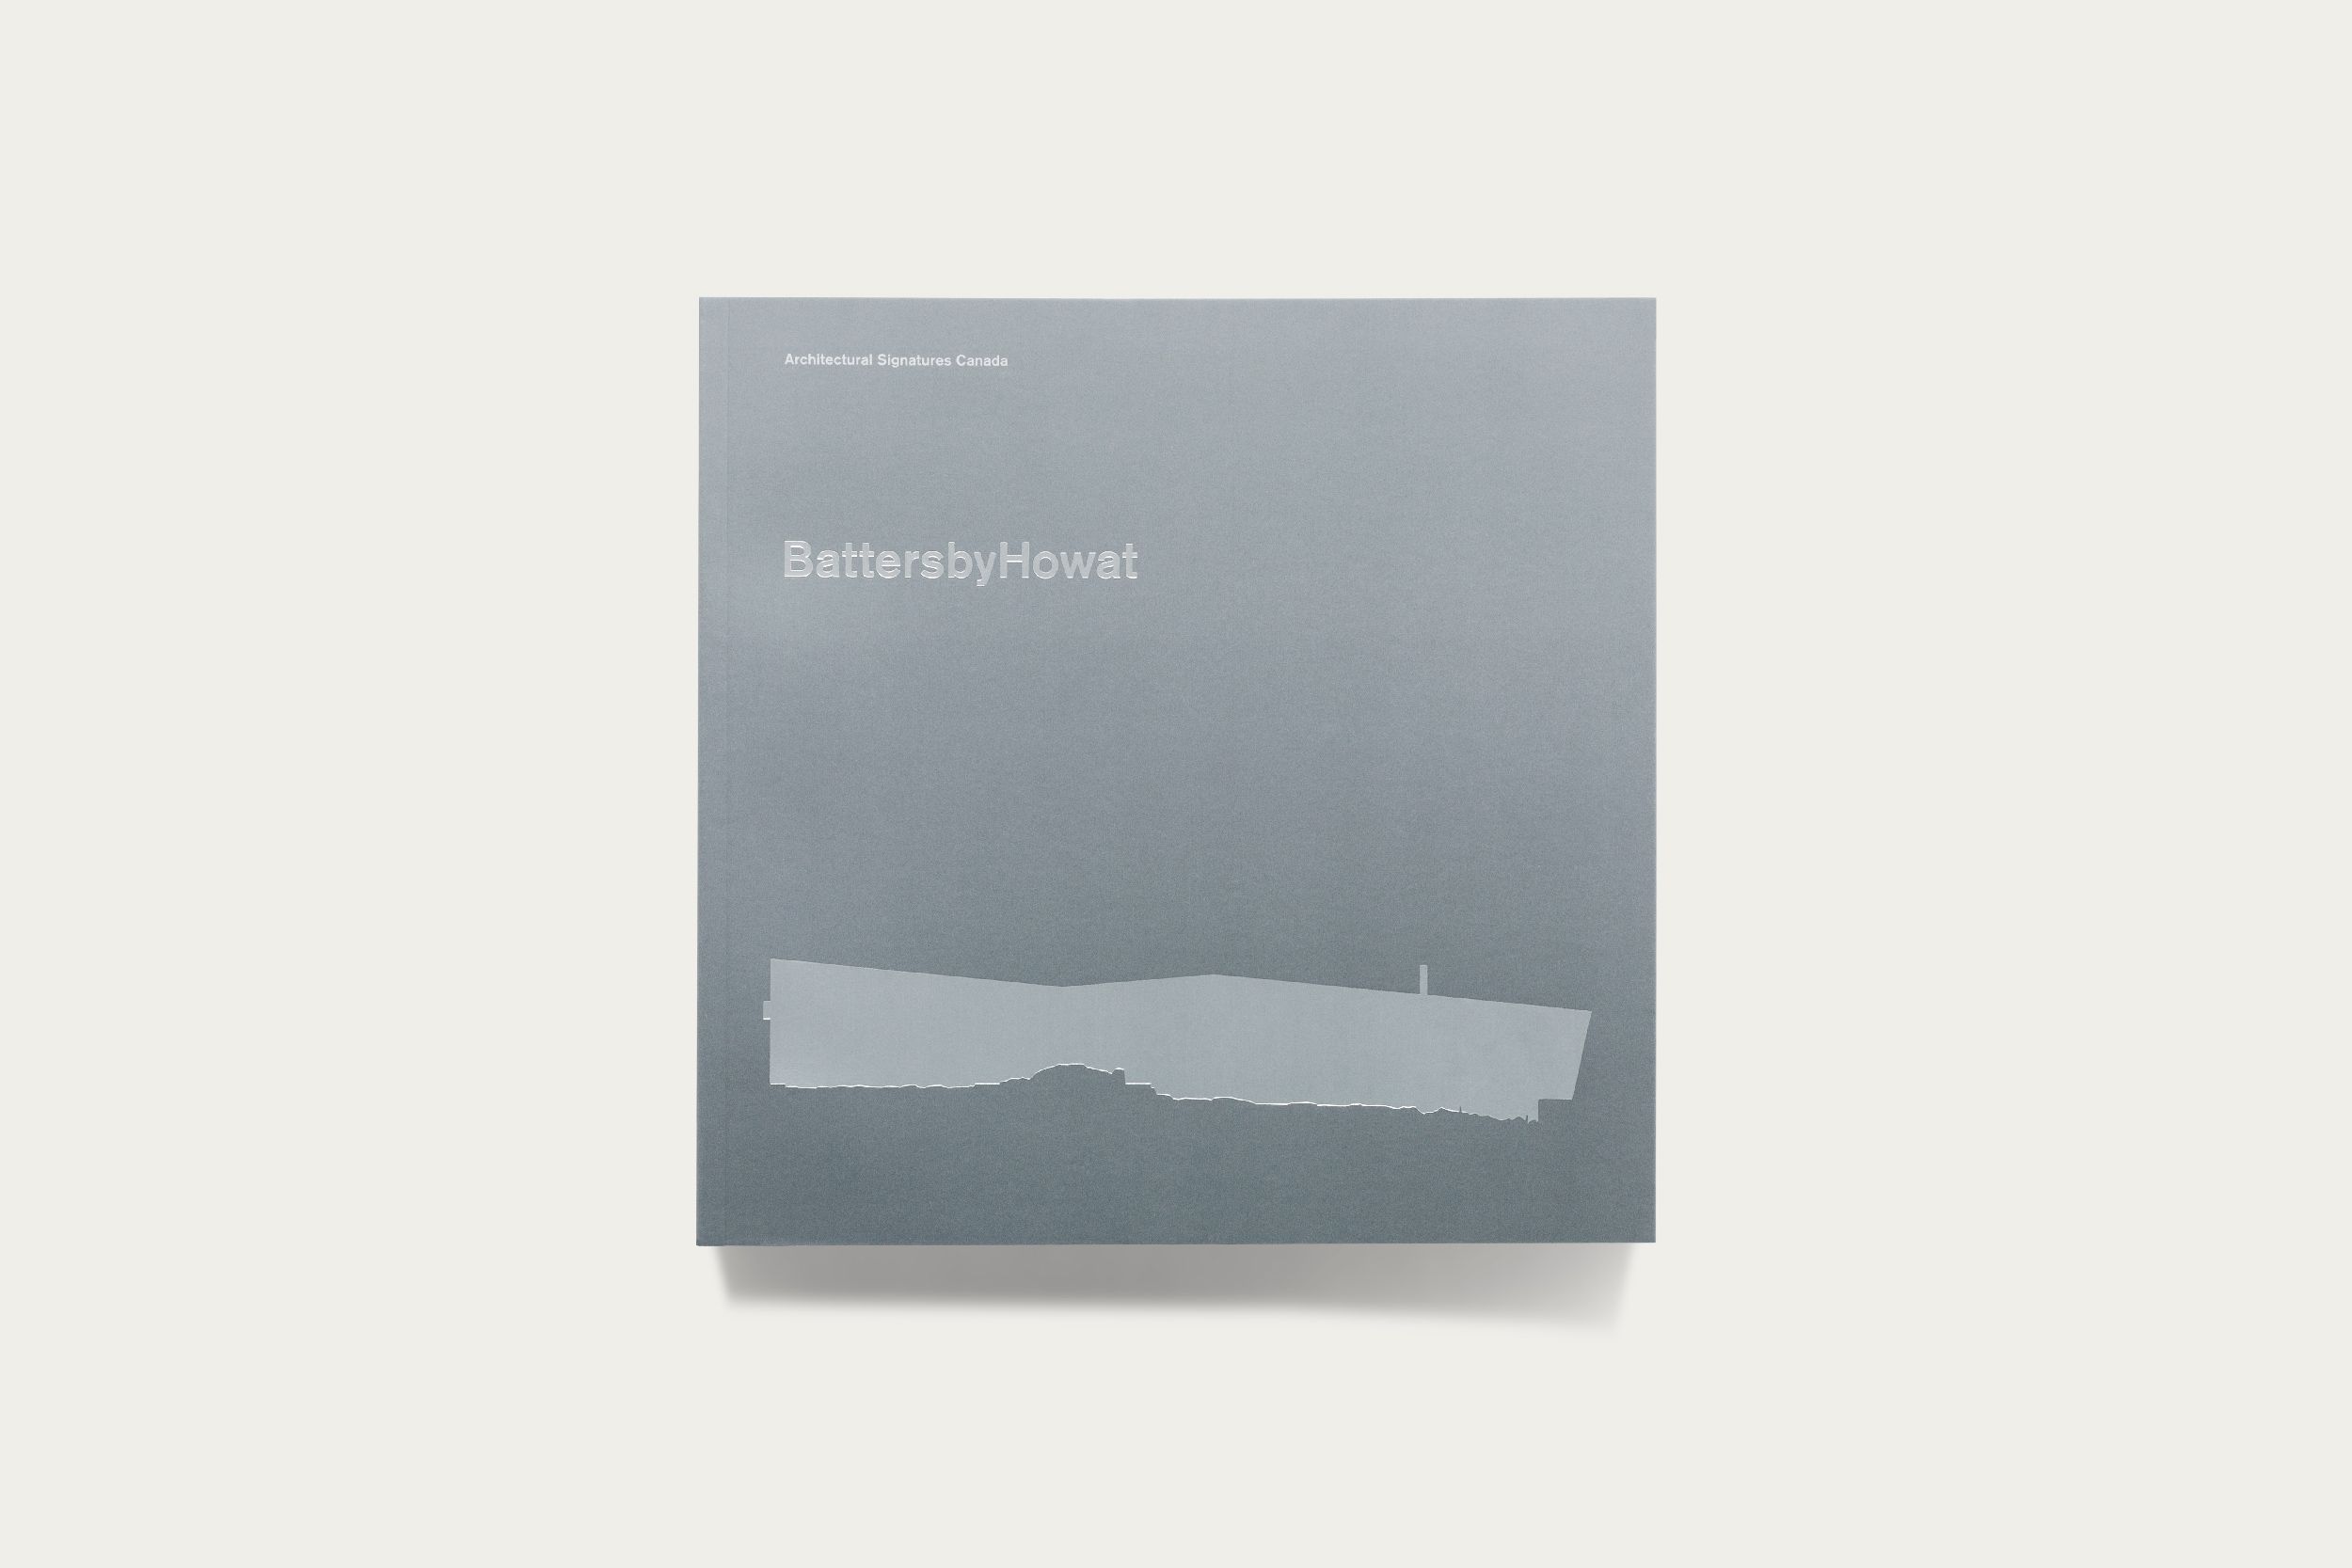 BattersbyHowat Architects monograph book design, cover